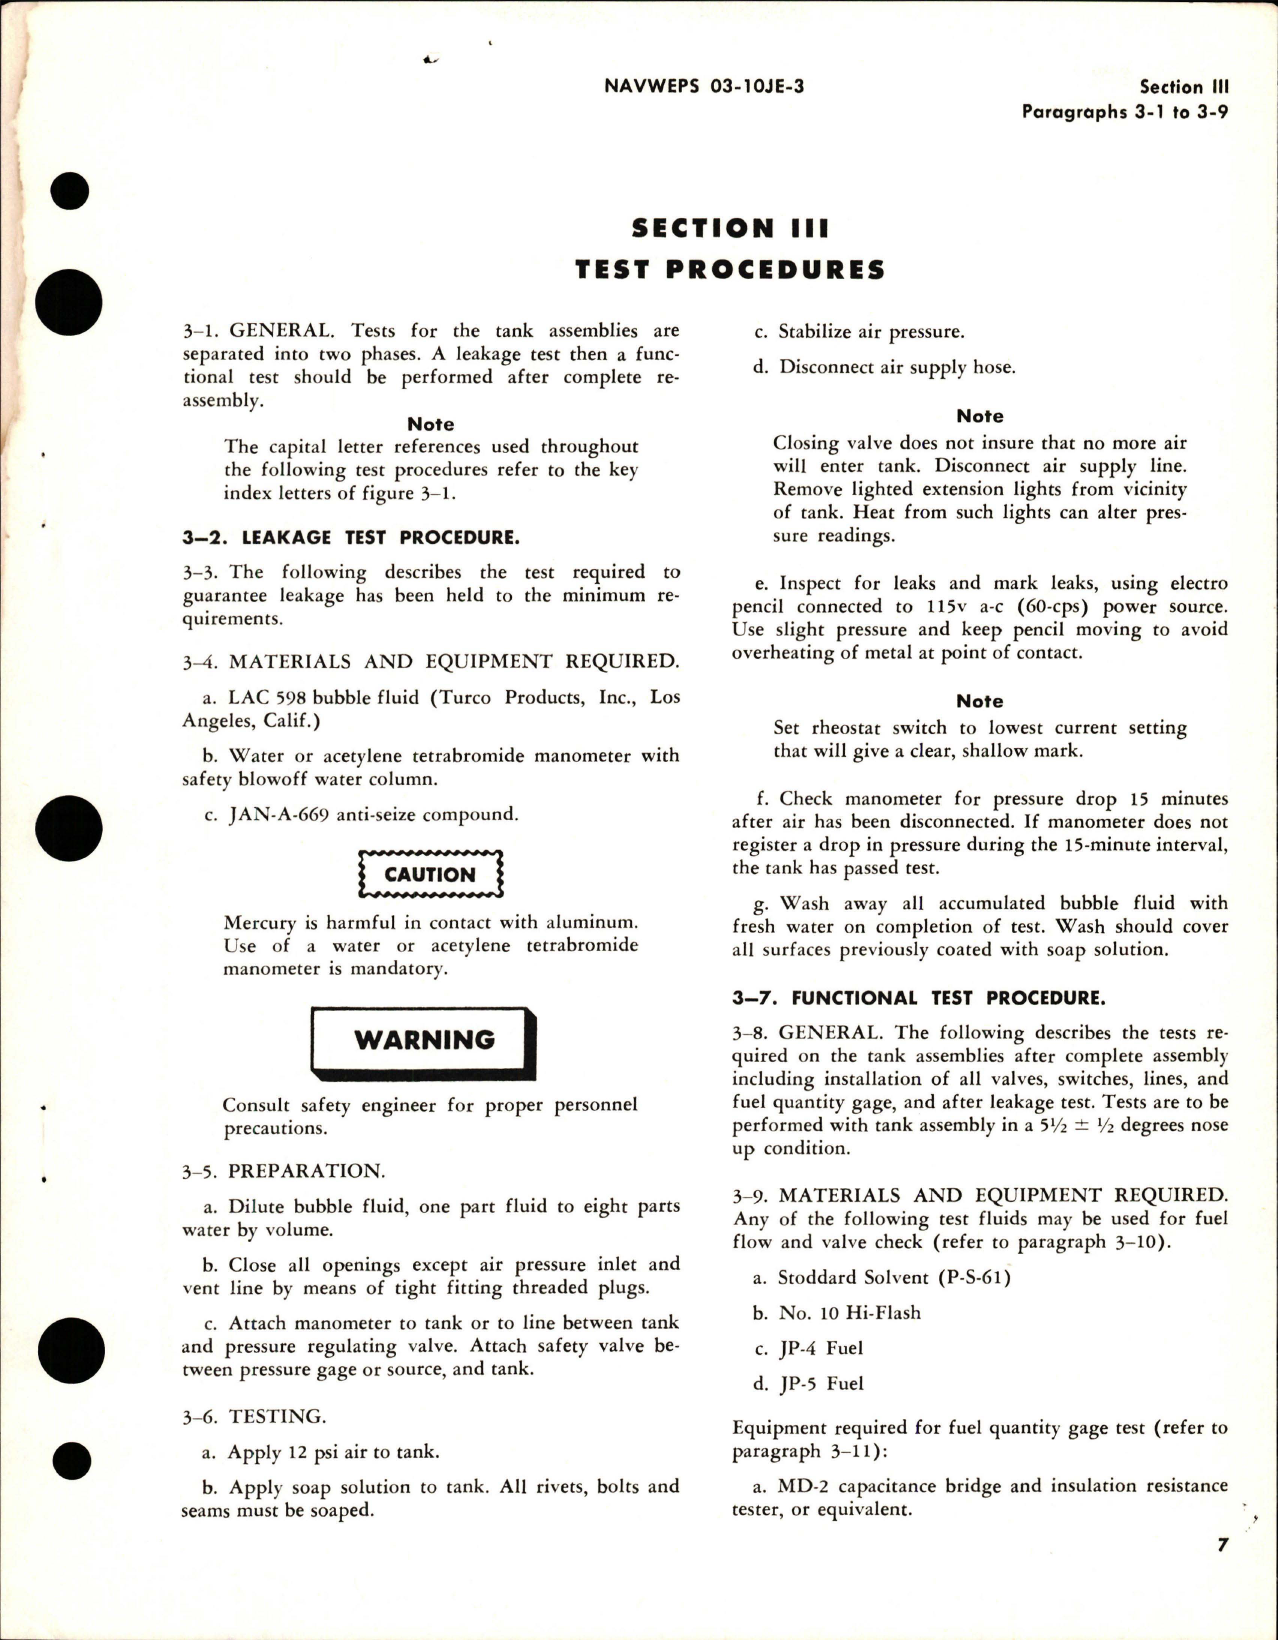 Sample page 5 from AirCorps Library document: Overhaul Instructions for 400 Gallon Fuel Tank - Parts 5556400, 5556400-501, and 5556400-503